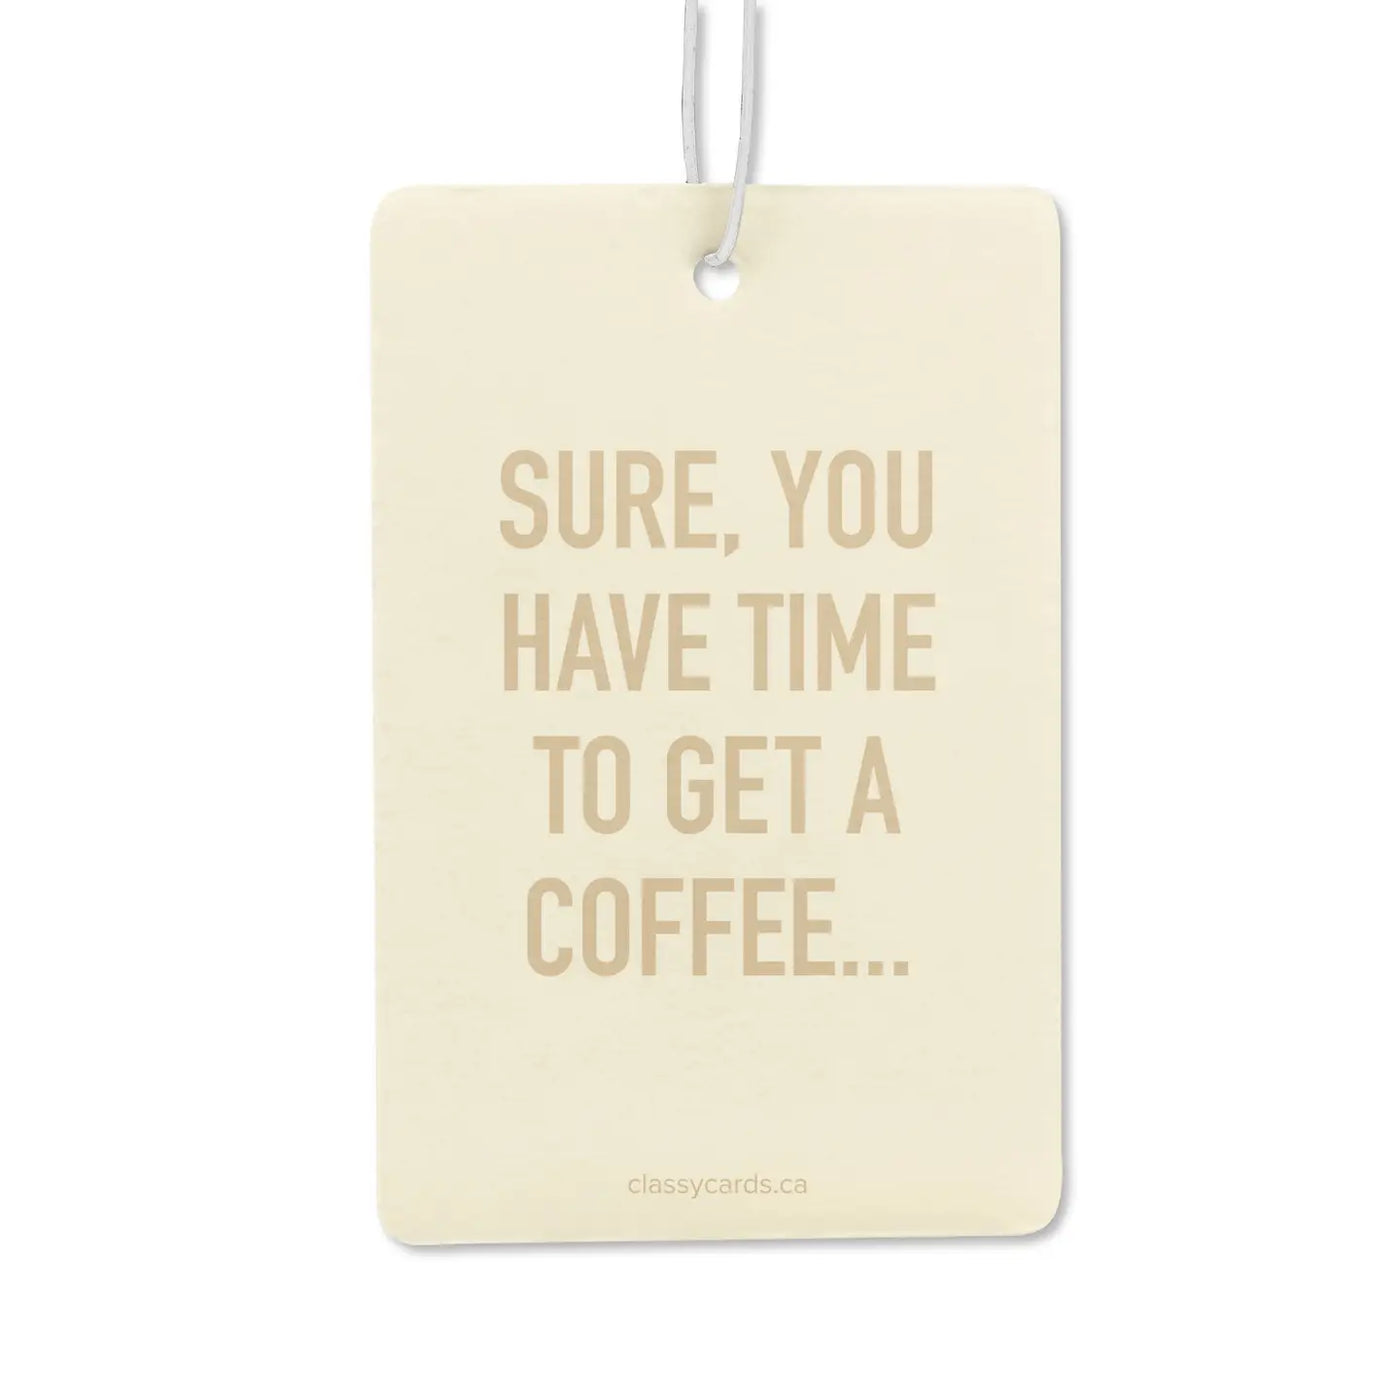 Time For Coffee Air Freshener